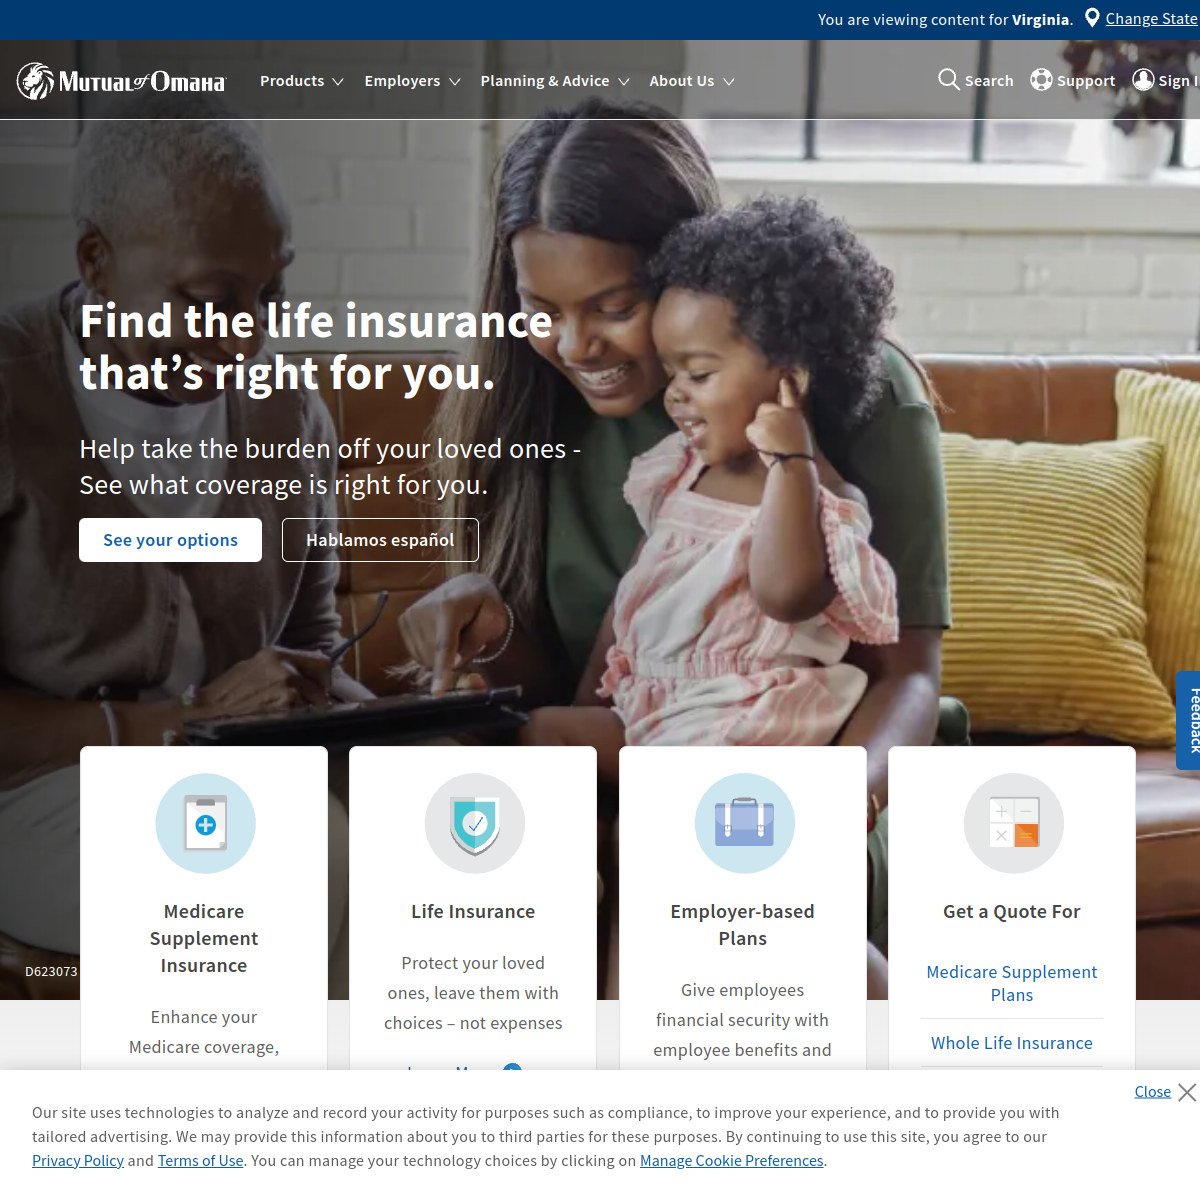 Mutual of Omaha Insurance Website Preview